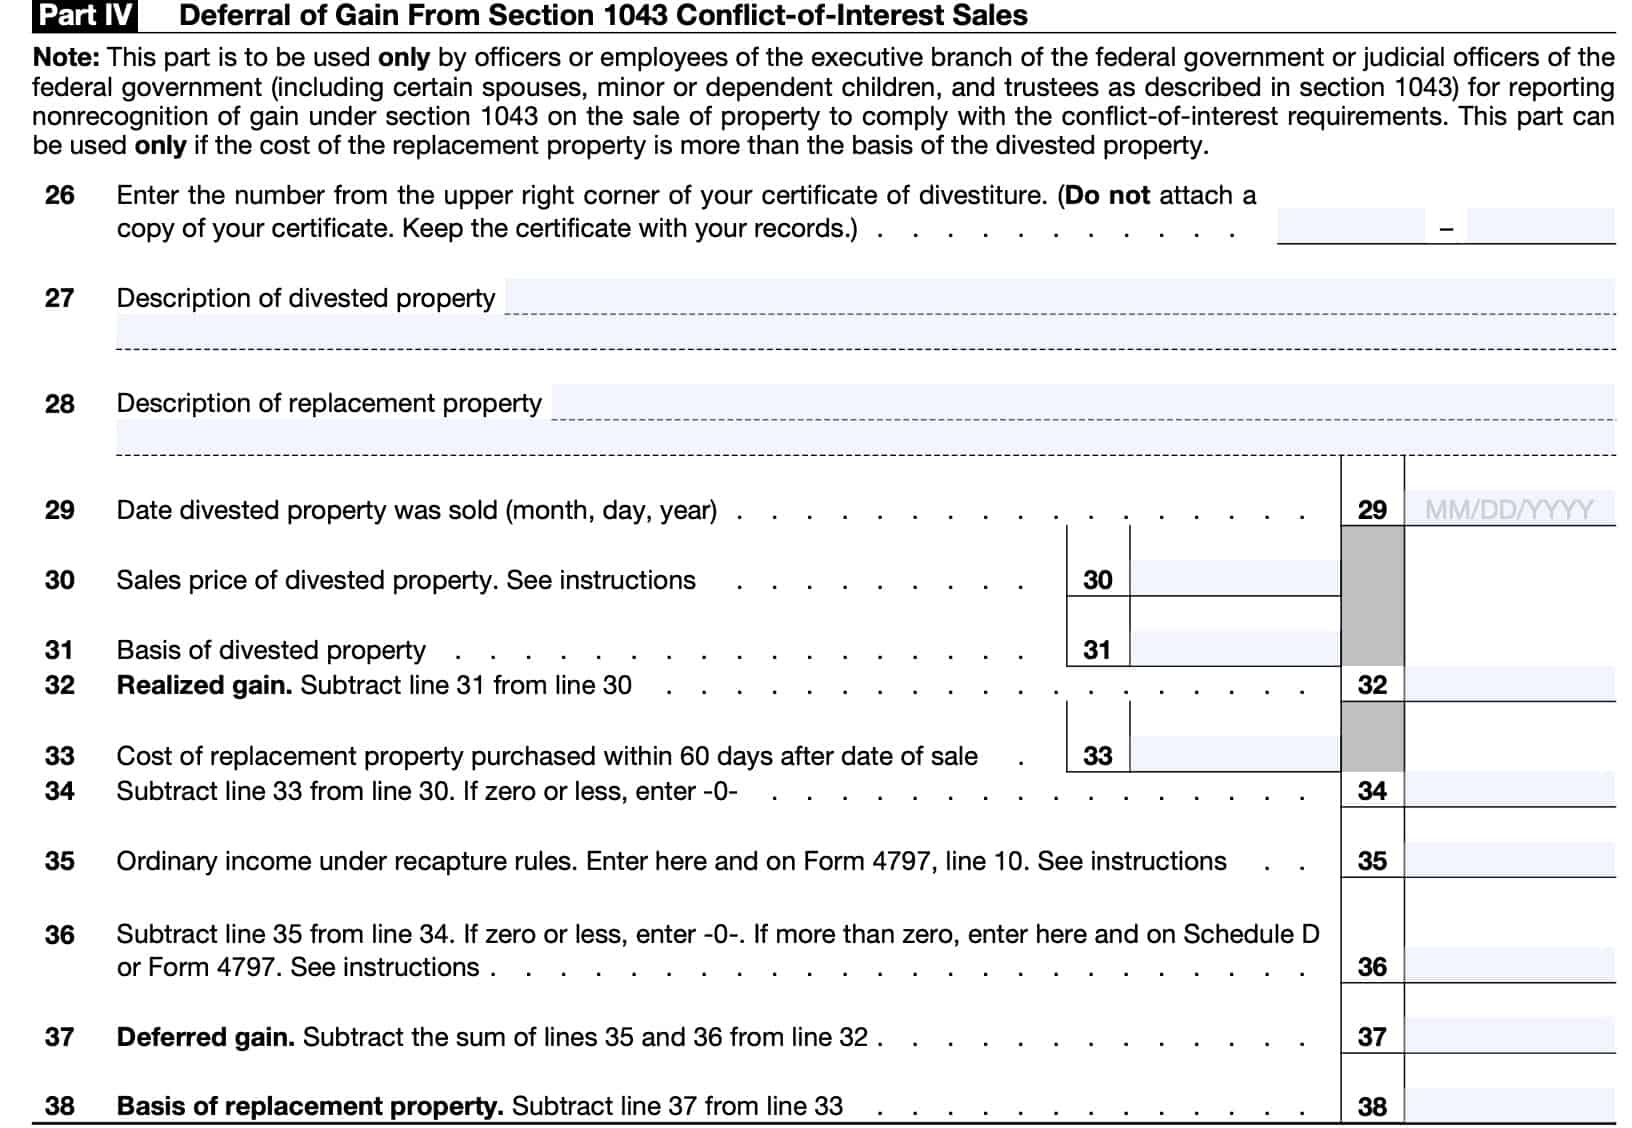 irs form 8824, part iv: deferral of gain from Section 1043 conflict of interest sales